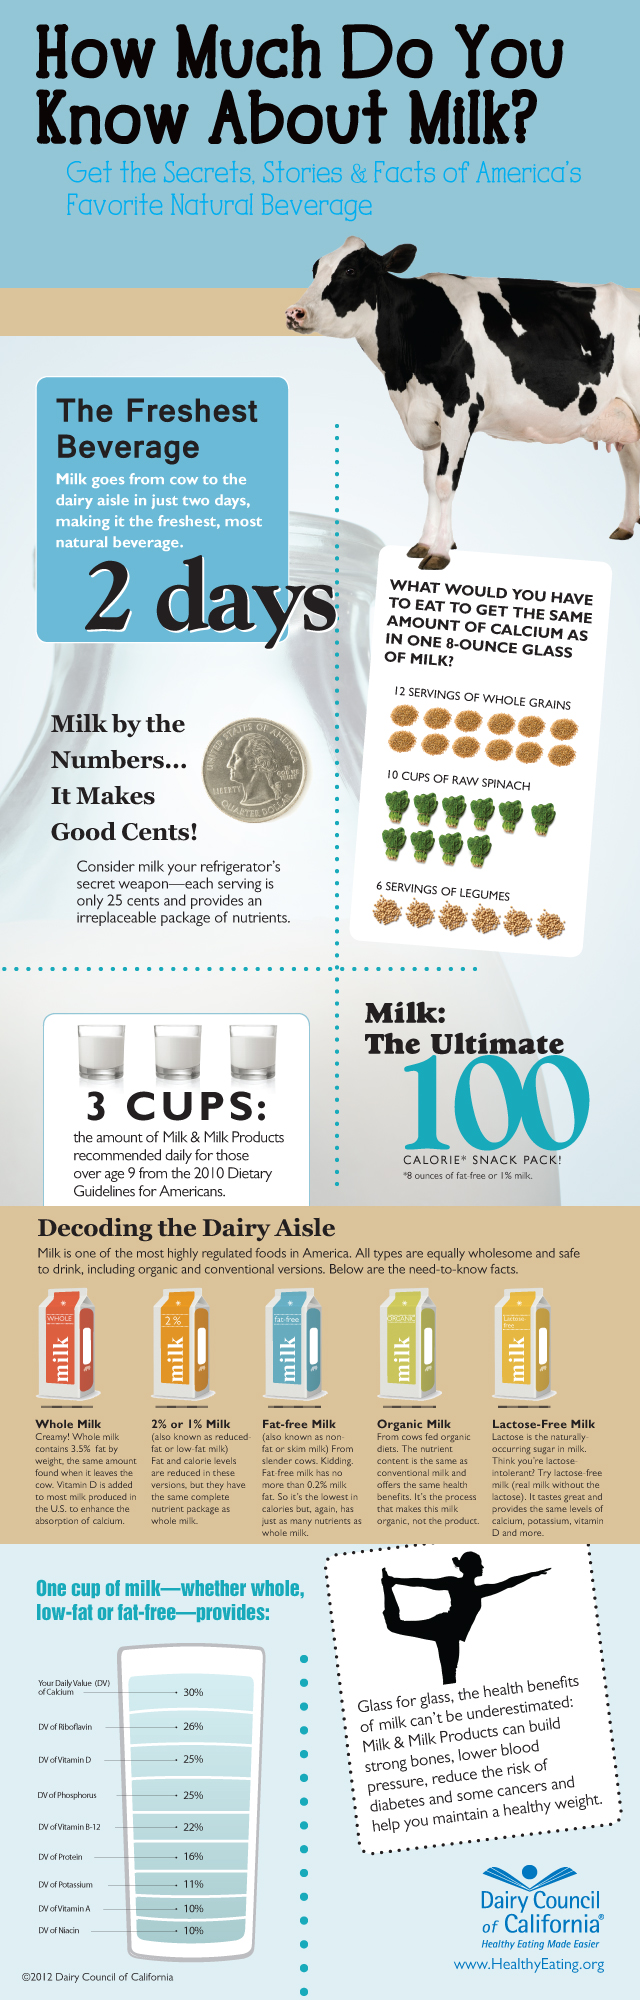 All-About-Milk-infographic